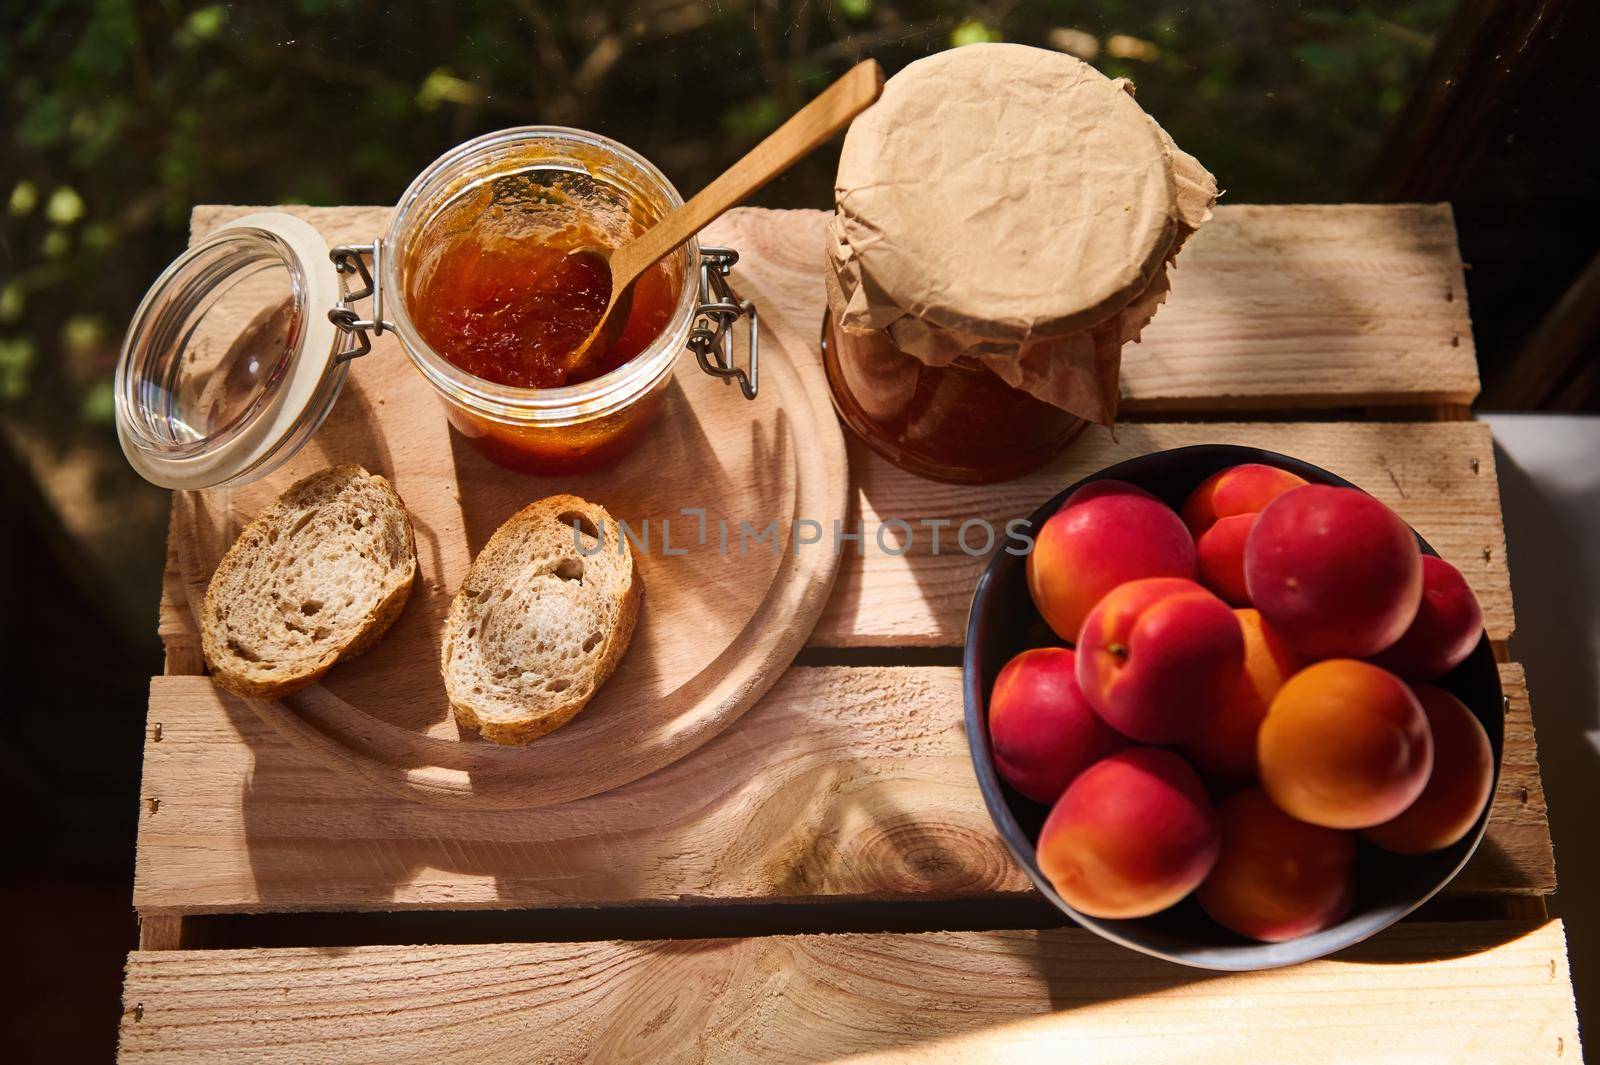 Overhead view of delicious ripe red apricots in a blue ceramic bowl on a wooden crate with jar of apricot confiture and slices of homemade freshly baked whole grain bread. Rustic style. Still life